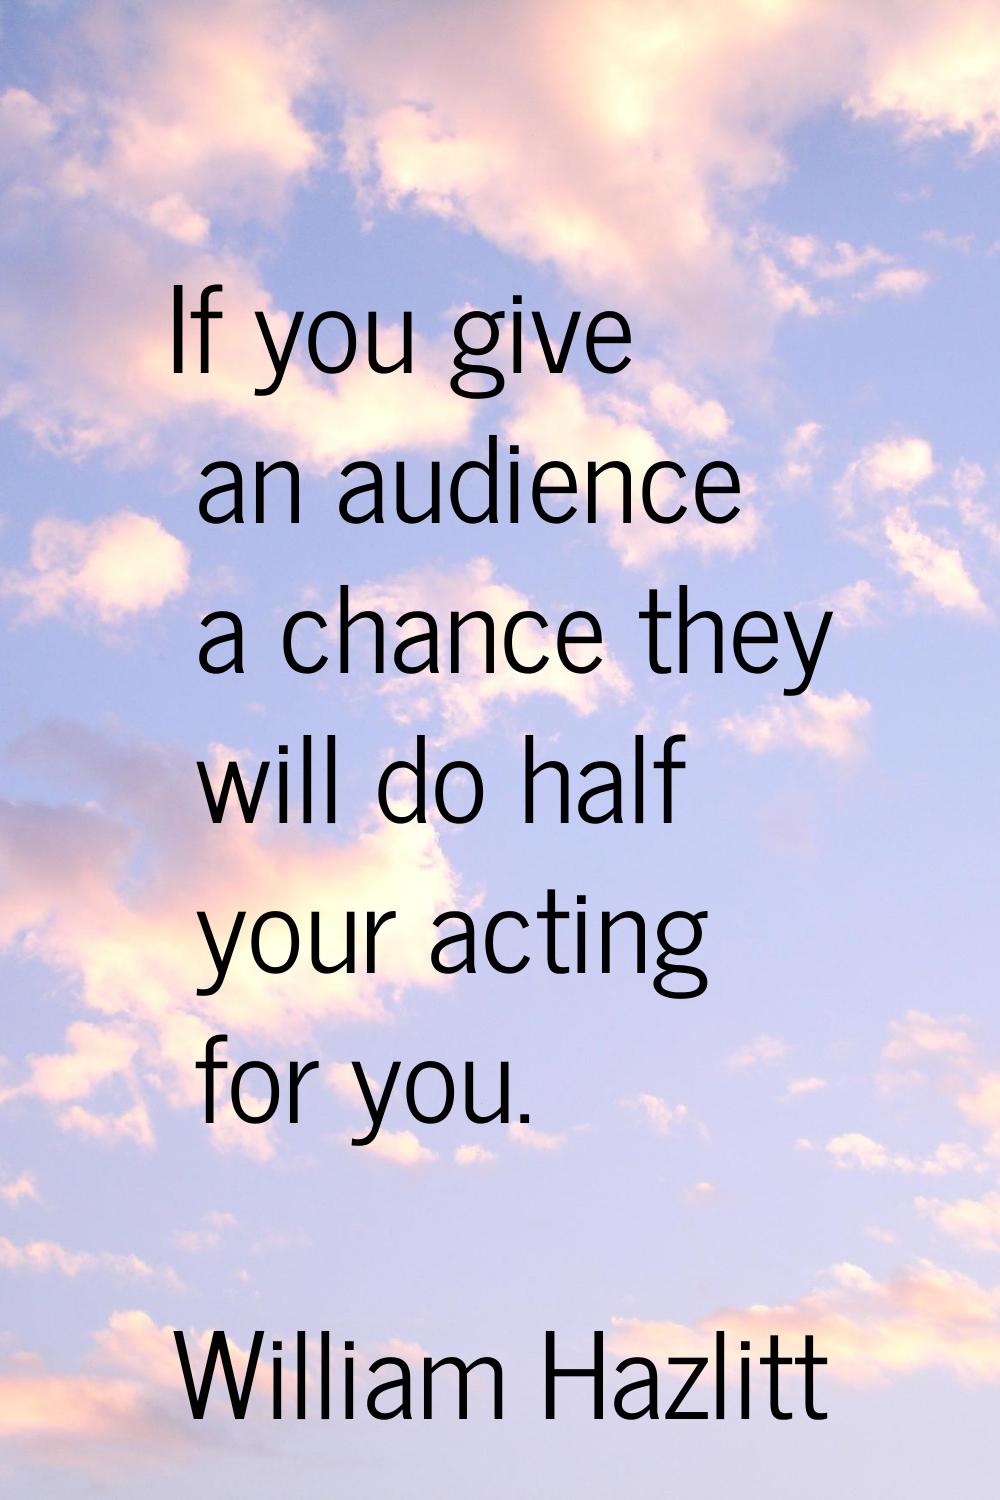 If you give an audience a chance they will do half your acting for you.